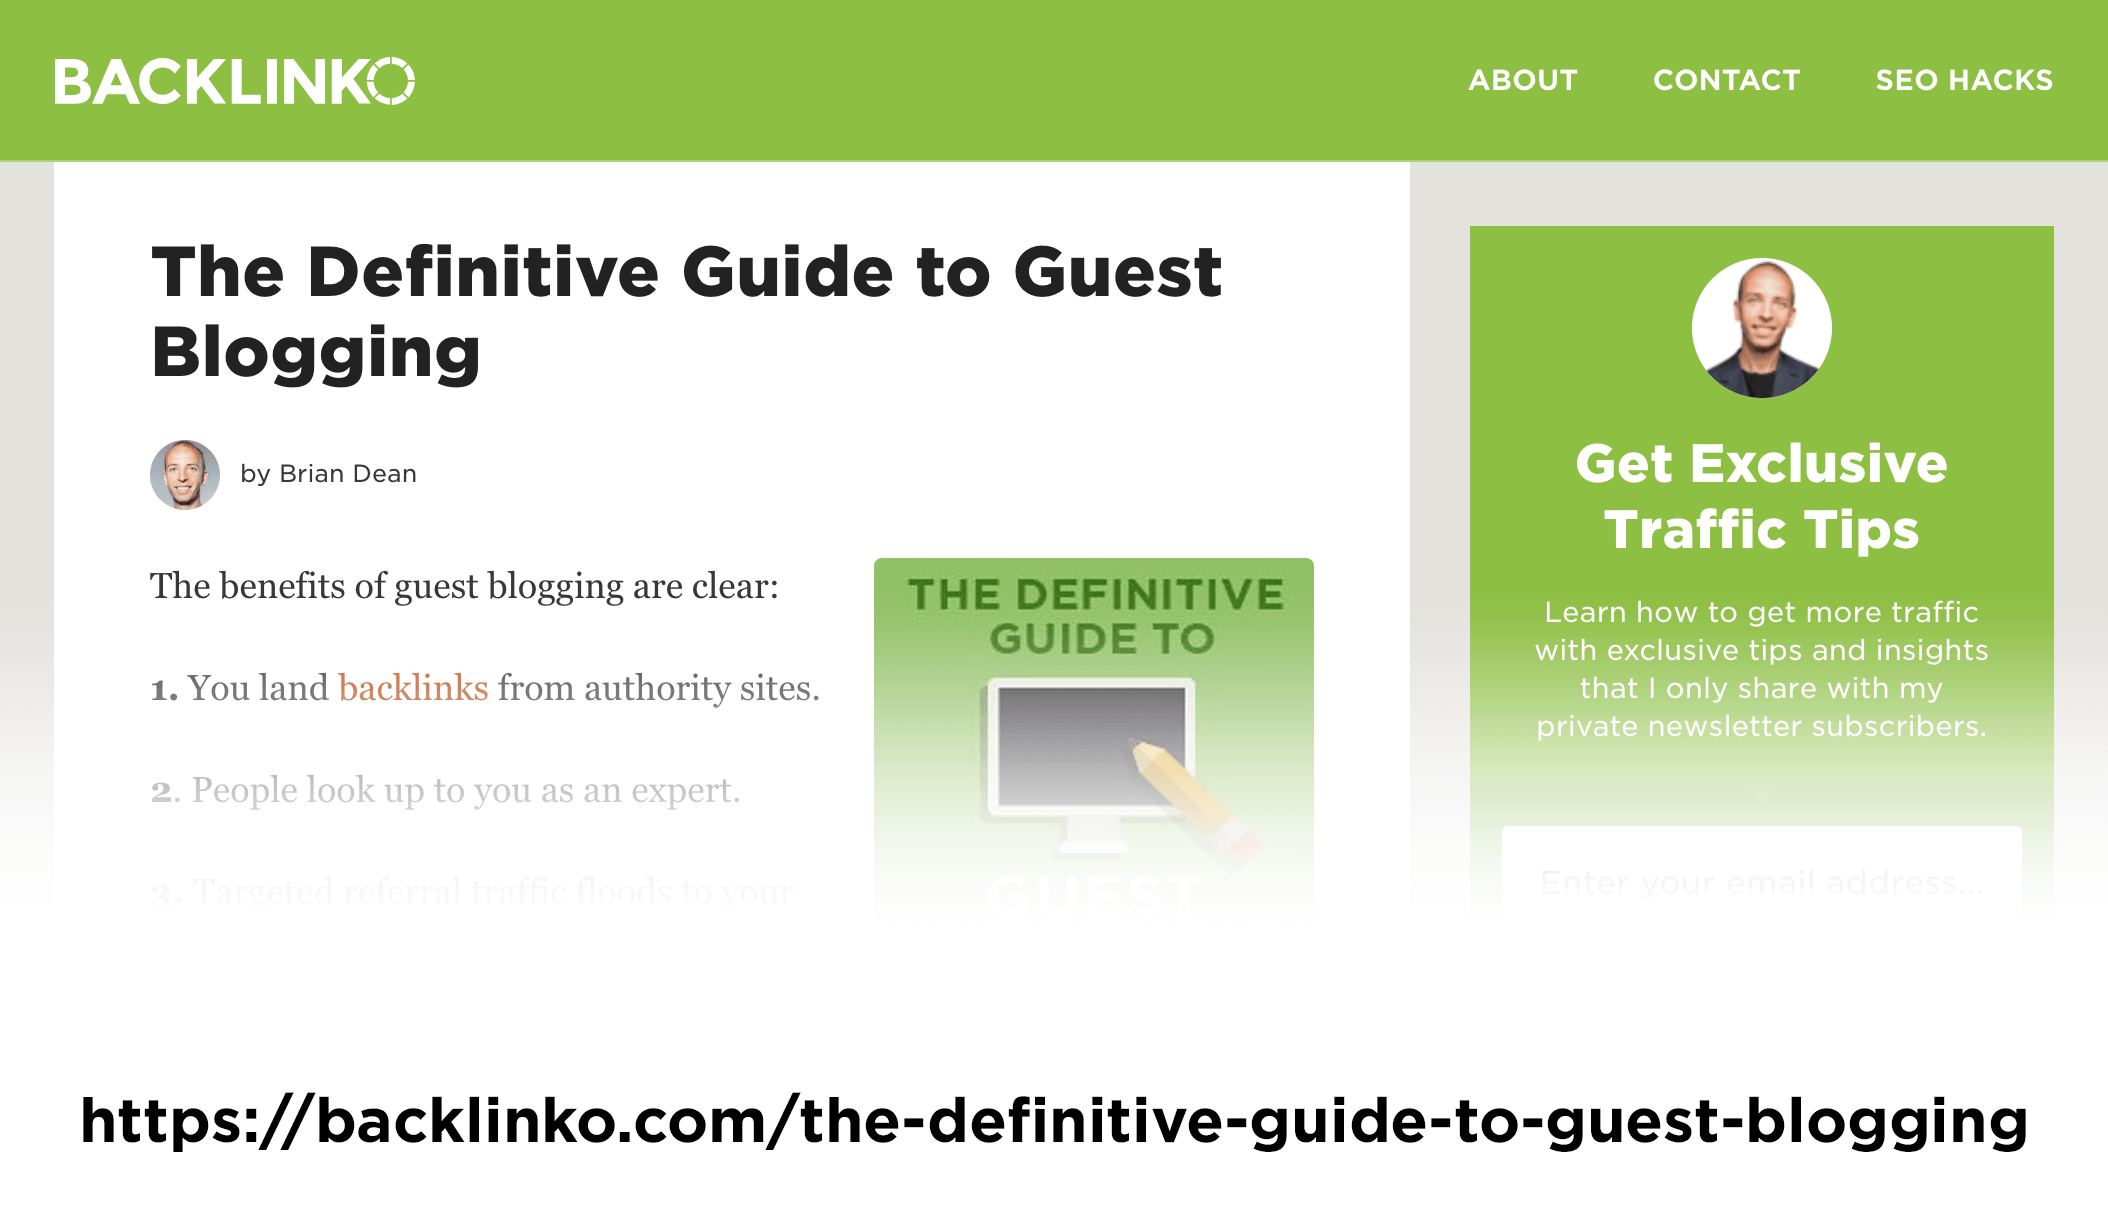 "The Definitive Guide to Guest Blogging" post – Old version